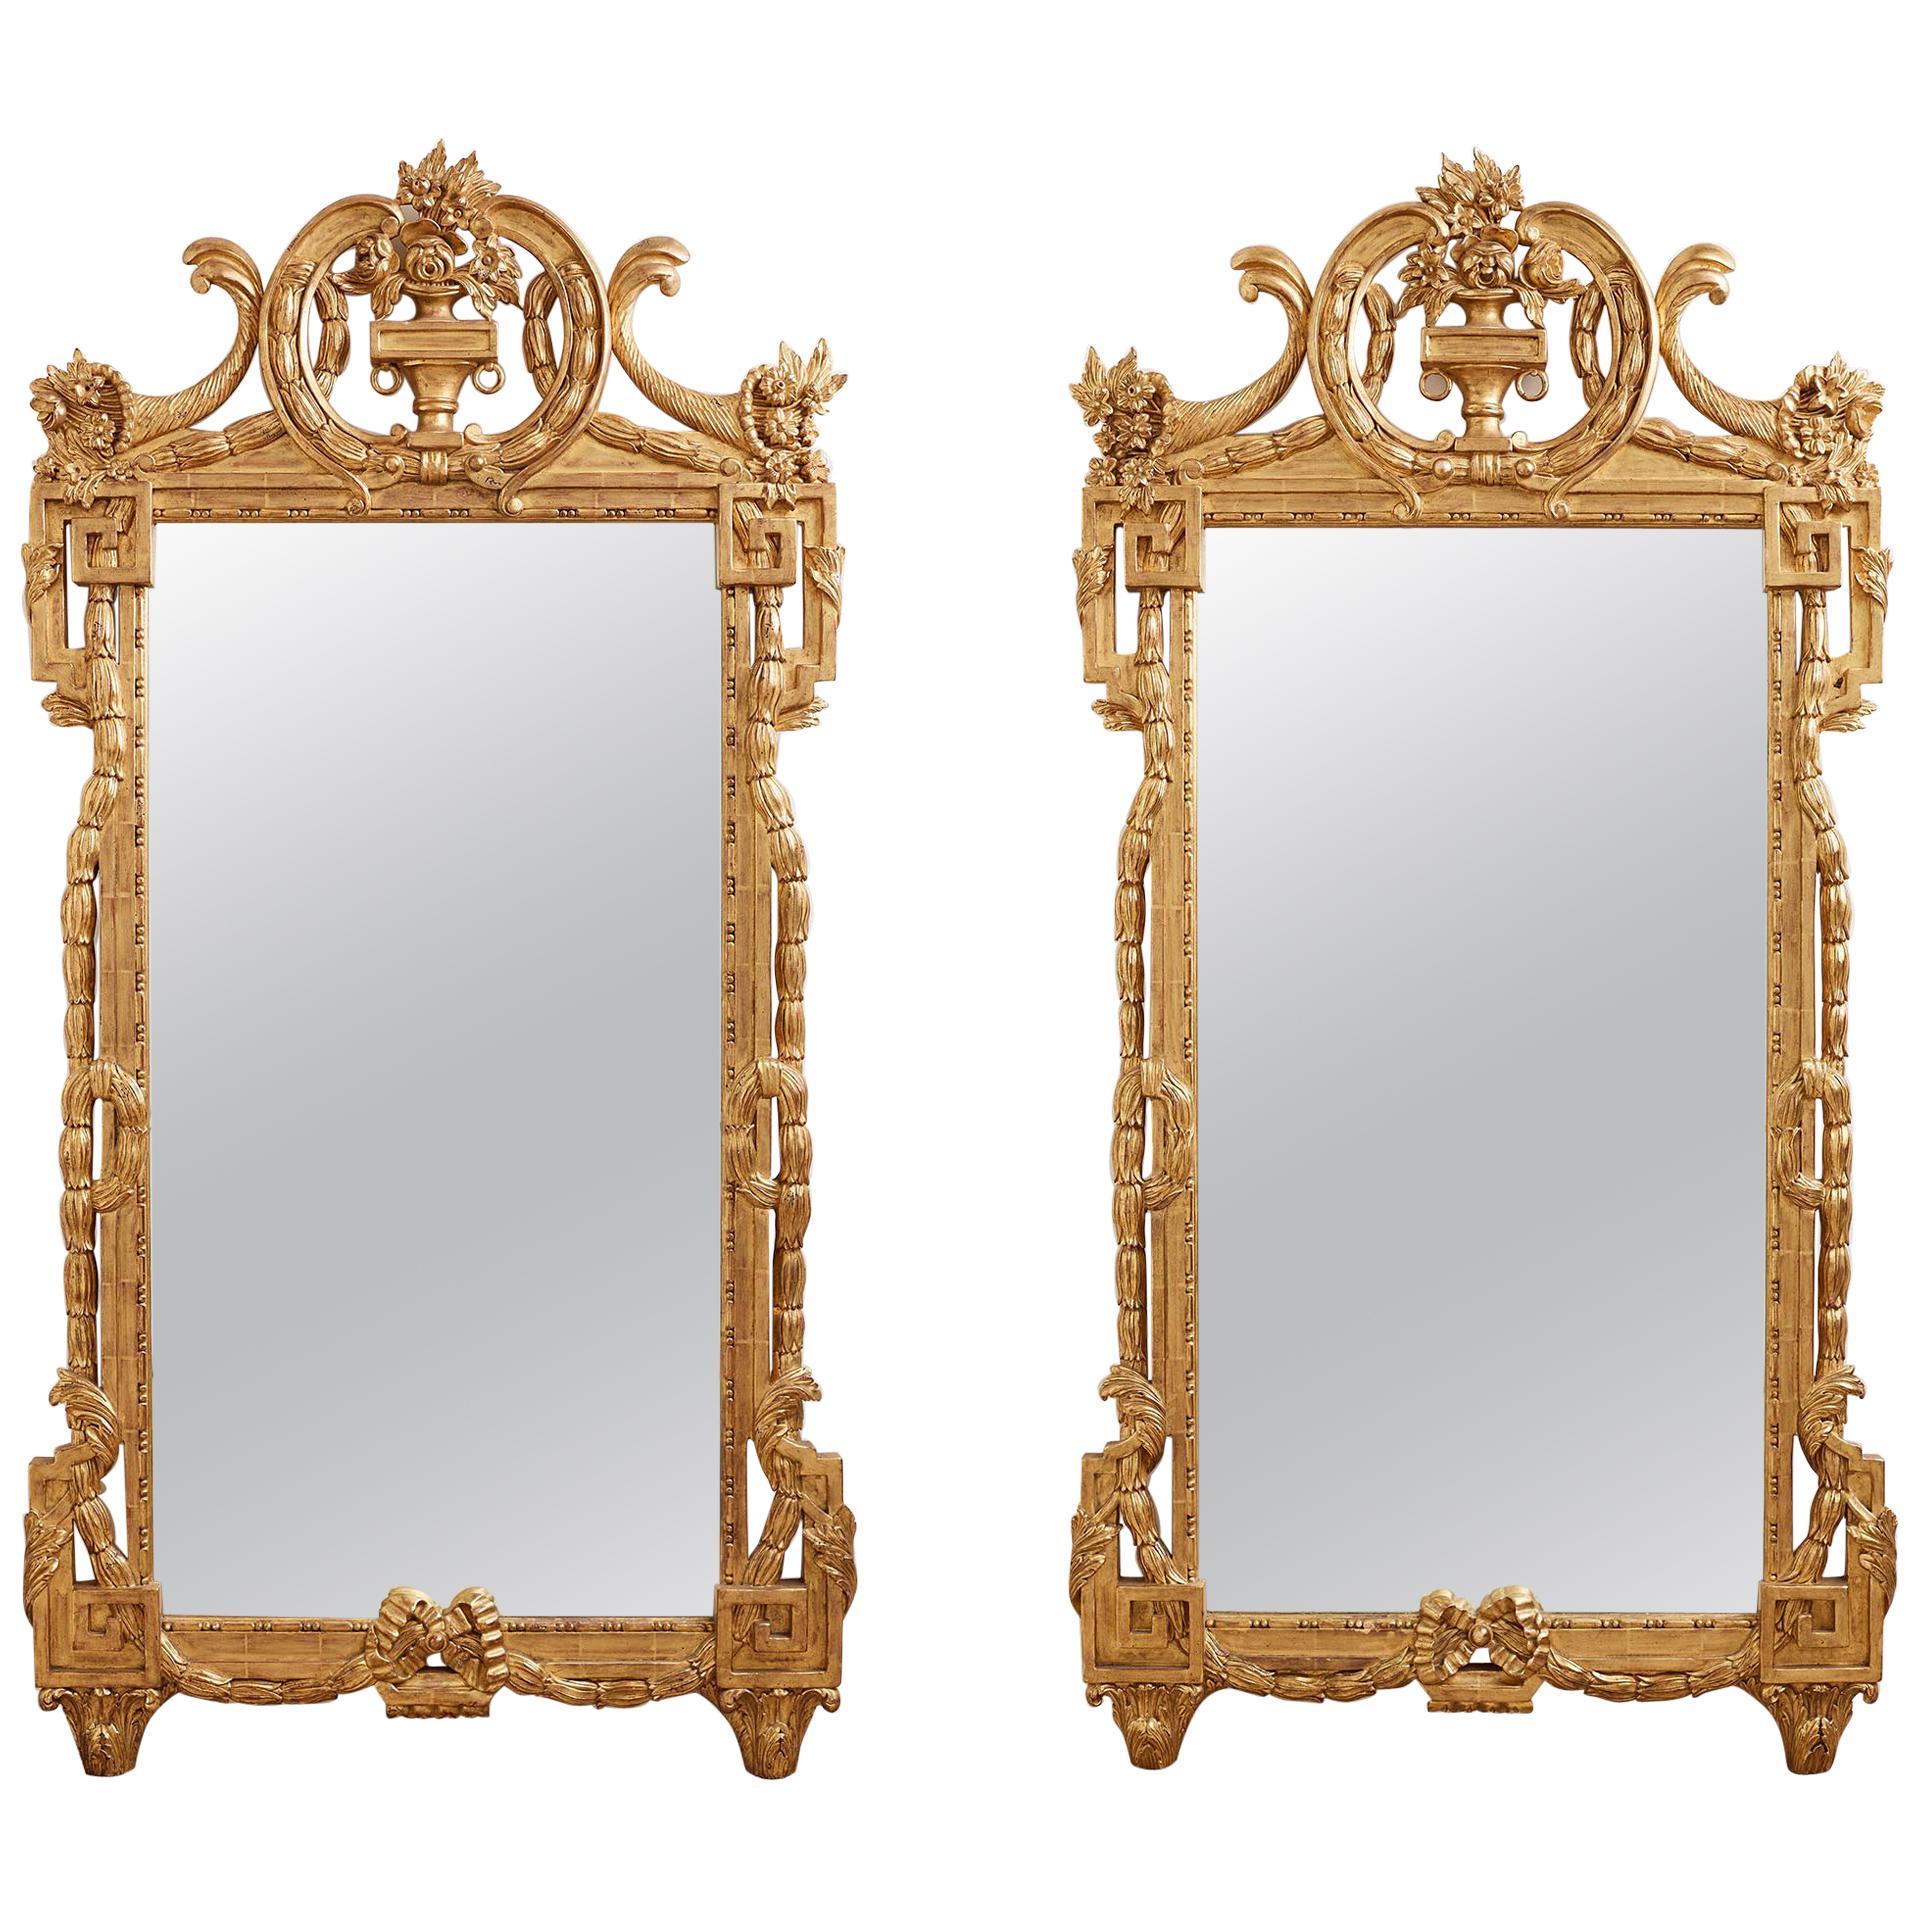 Pair of Neoclassical Louis XVI Style Giltwood Mirrors